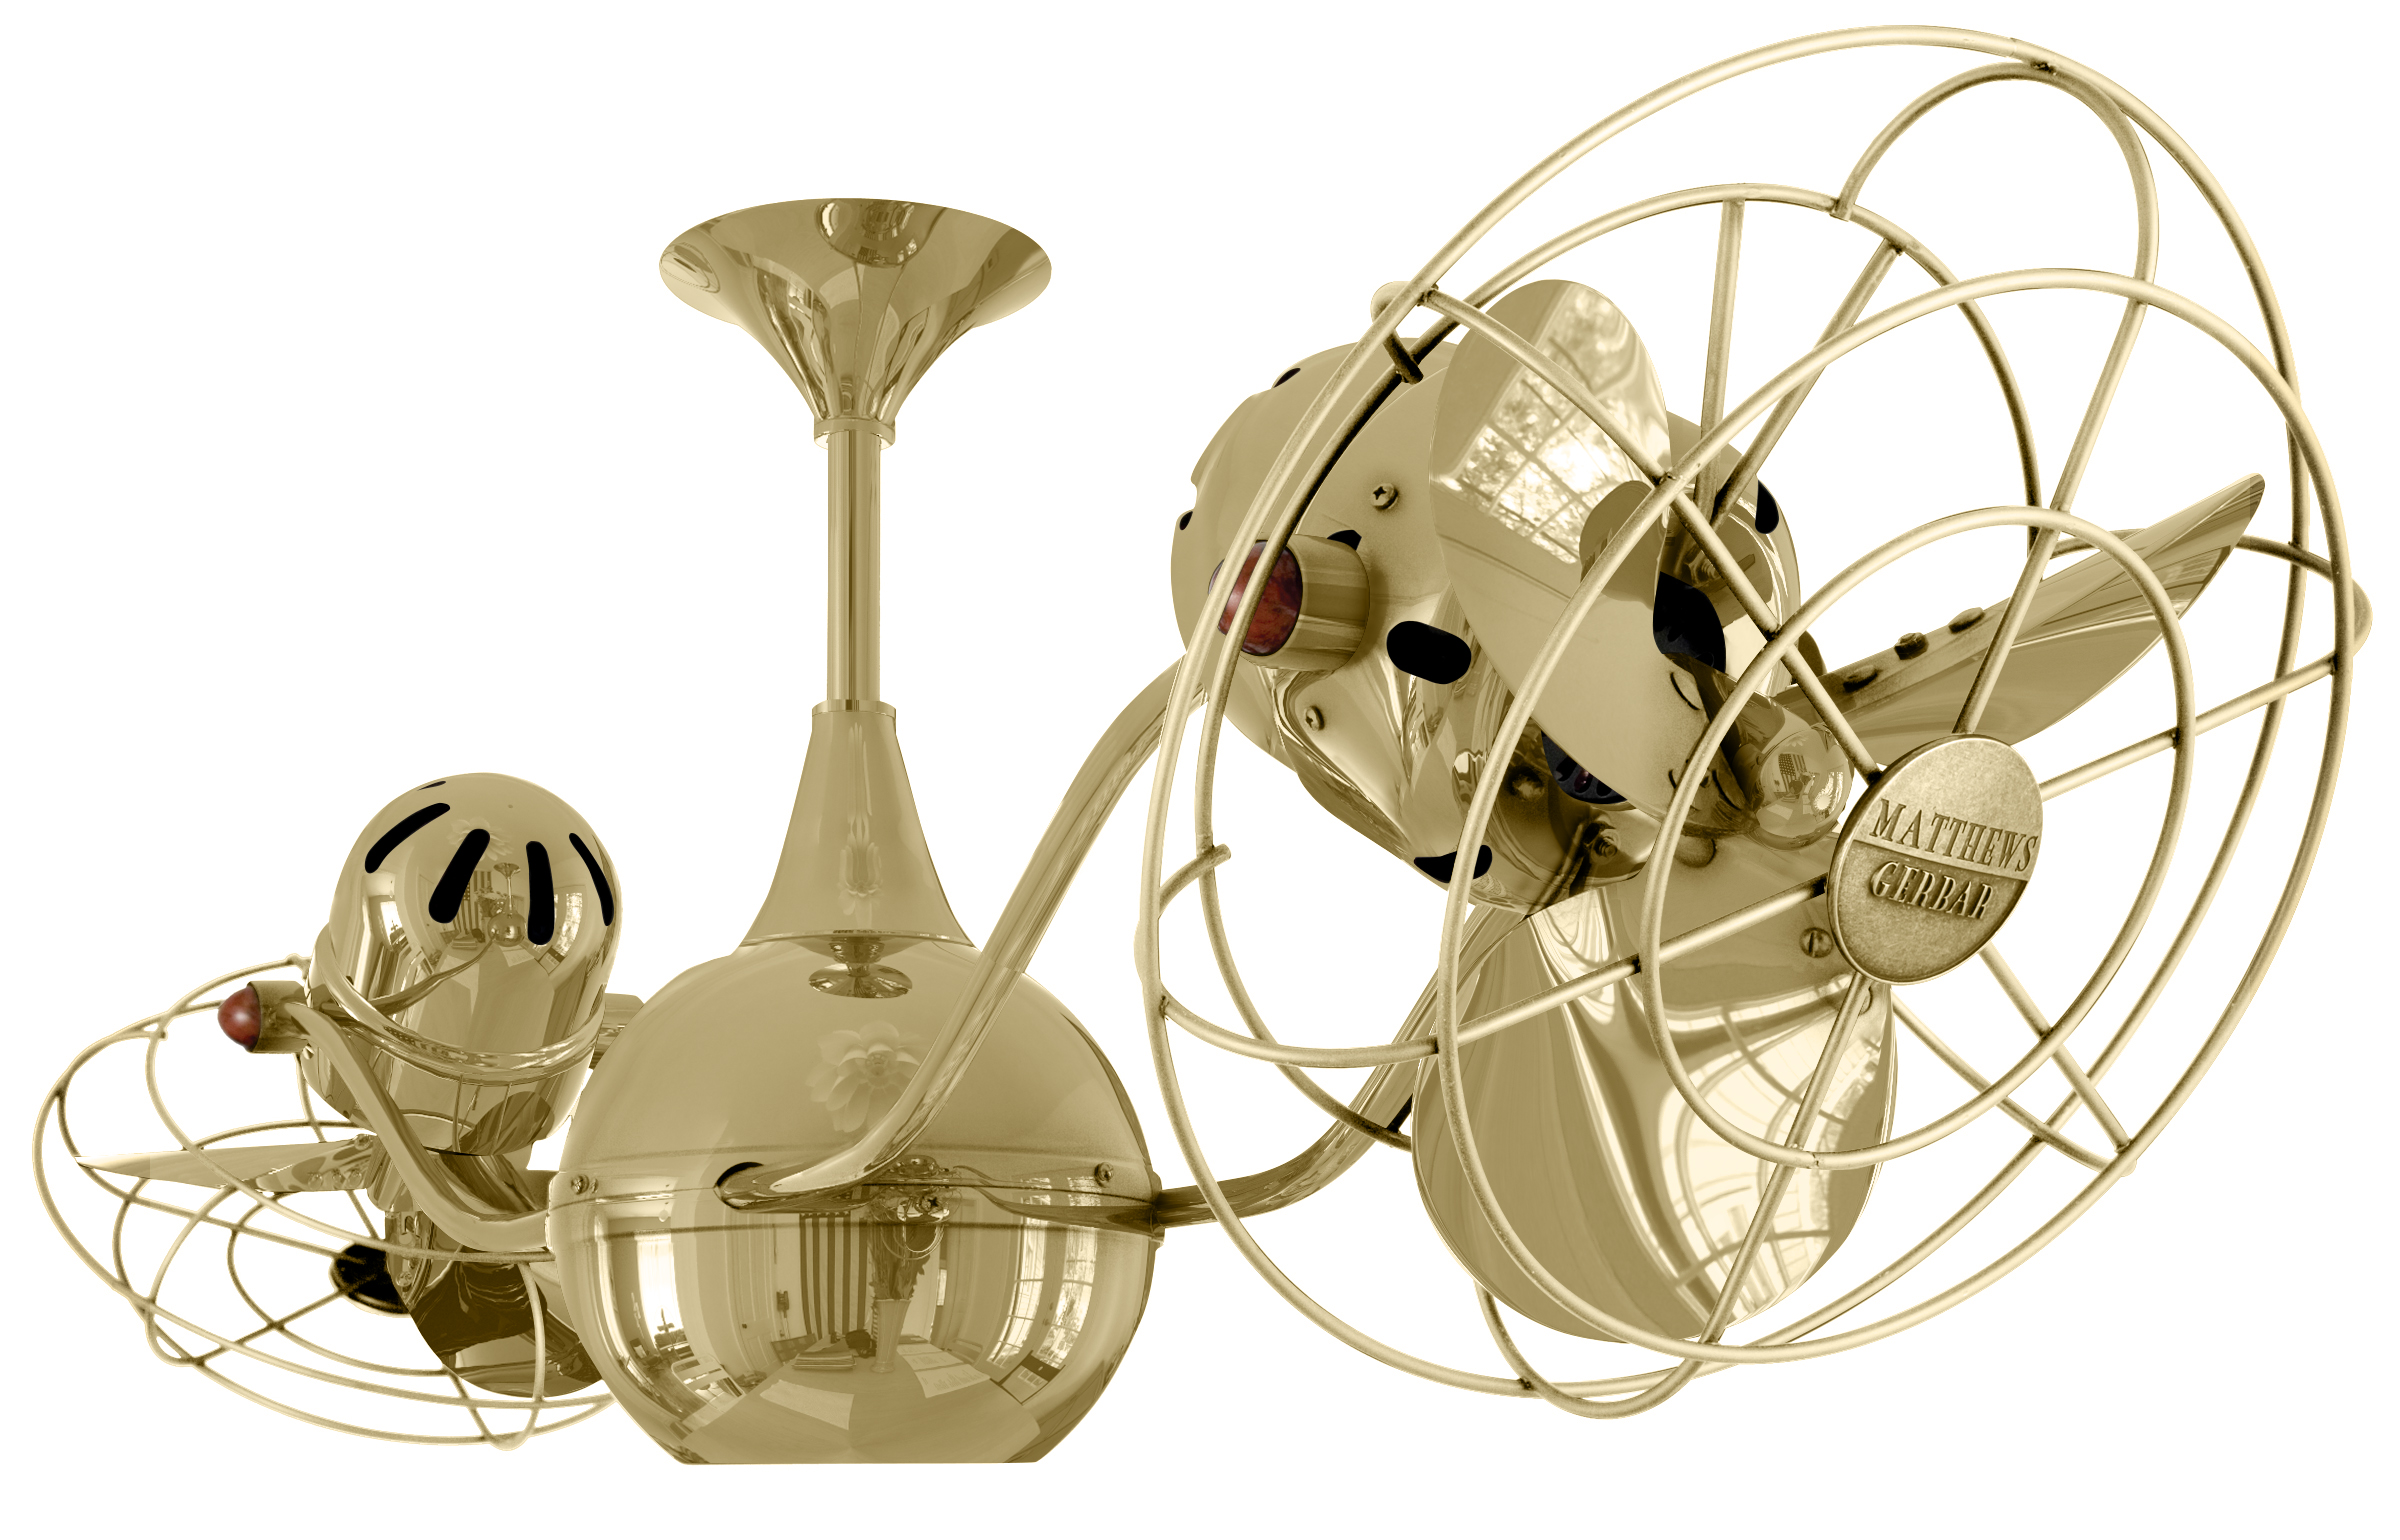 Vent-Bettina rotational dual head ceiling fan in Polished Brass finish with metal blades in decorative cages made by Matthews Fan Company.